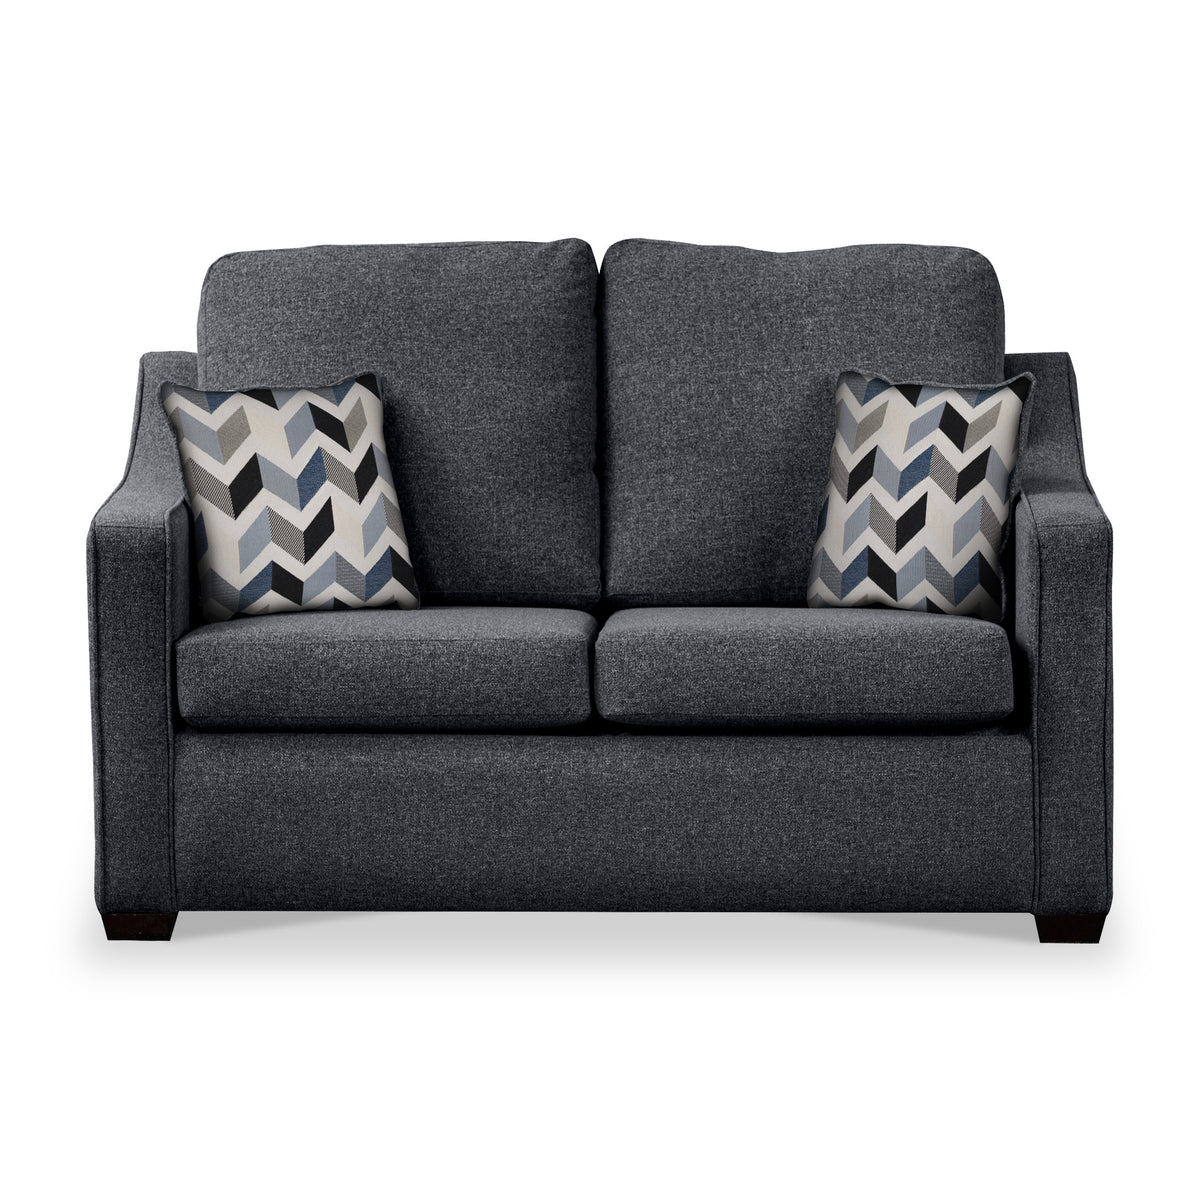 Charlcote Charcoal Faux Linen 2 Seater Sofabed with Denim Scatter Cushions from Roseland Furniture